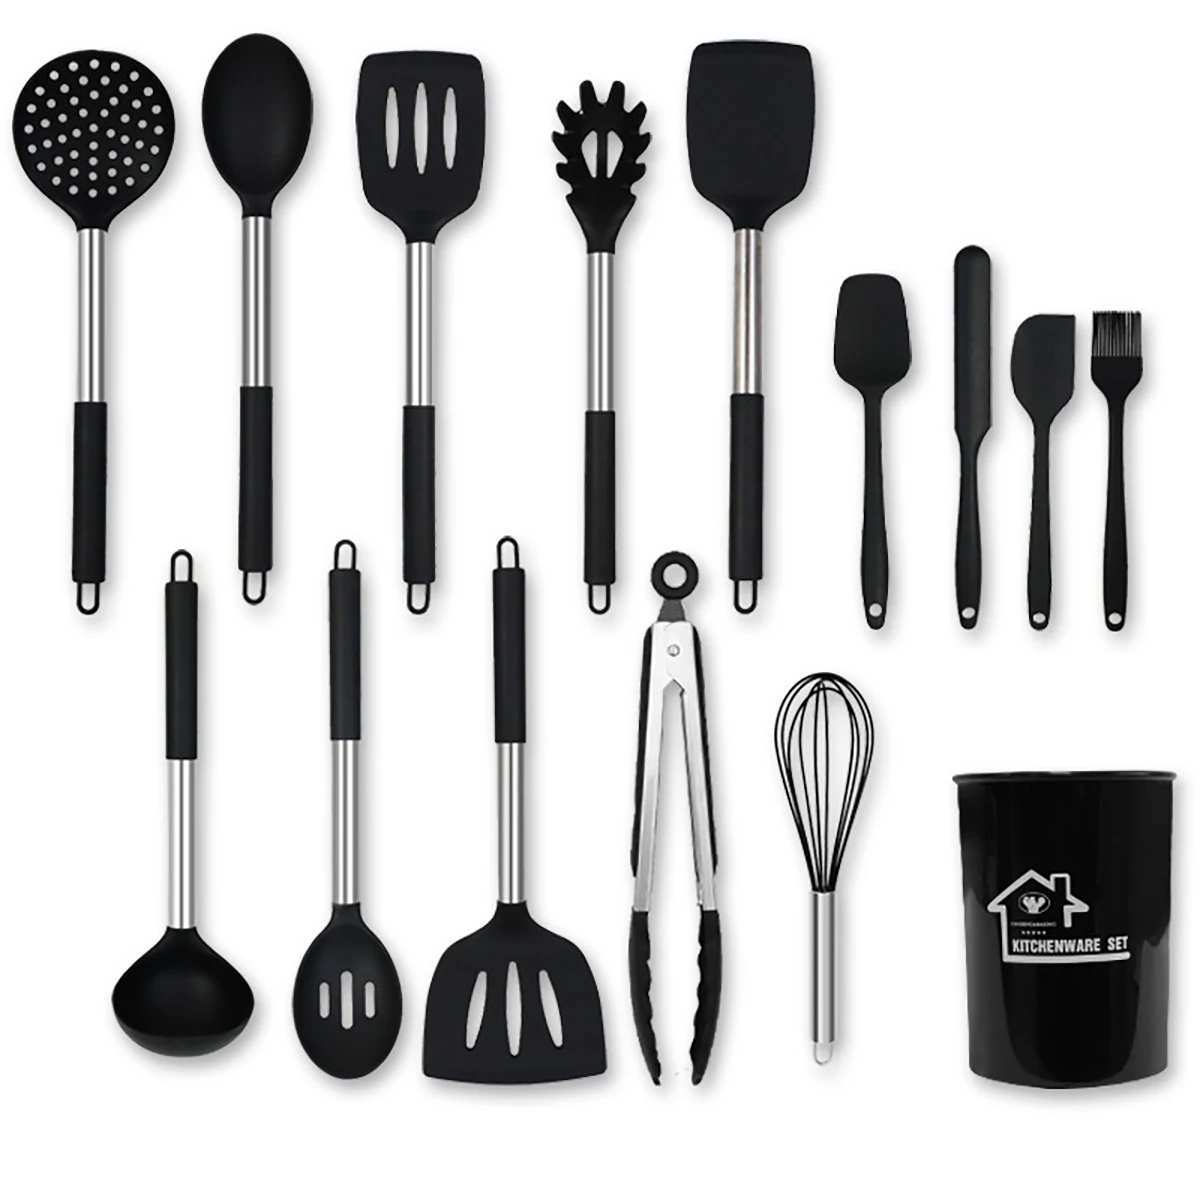 

15Pcs Silicone Cooking Tool Set Large Spatula Shovel Spoon Kitchenware Utensils Stainless Steel Handle Non-Stick Kitchen Gadgets